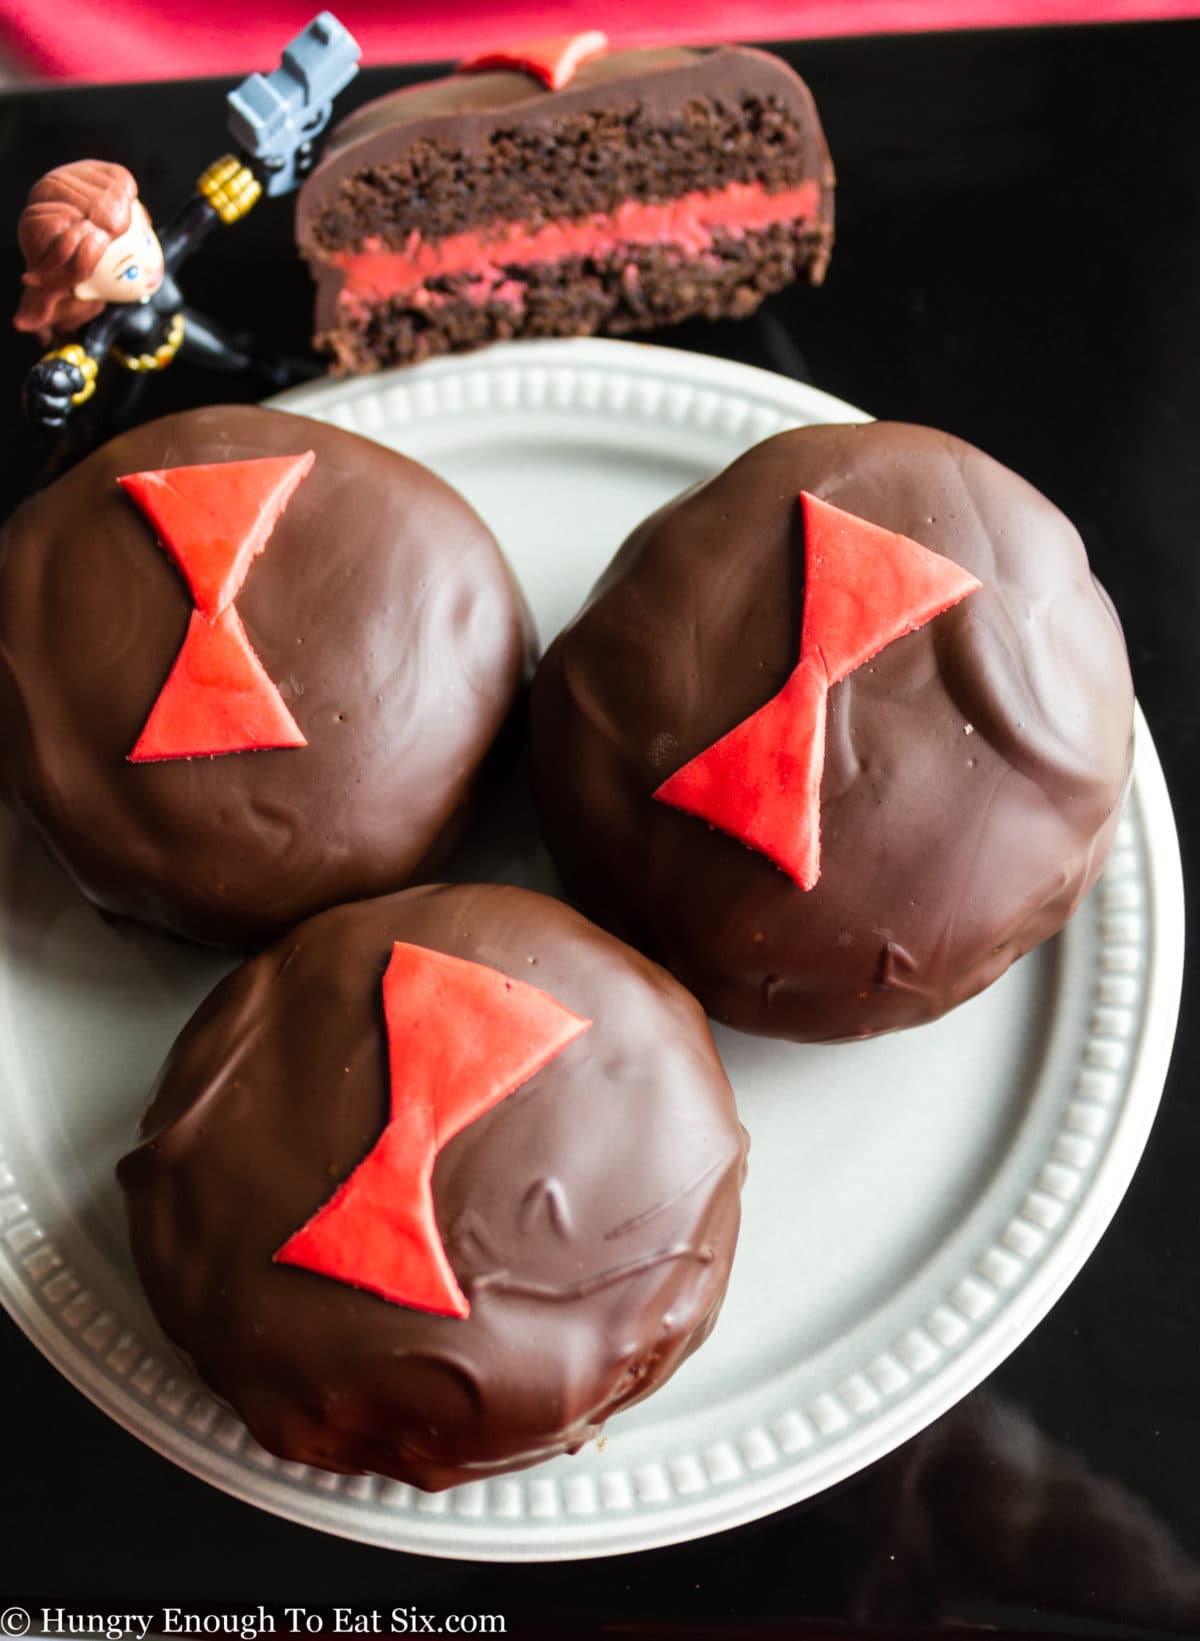 Plate of chocolate covered cookies with red emblems